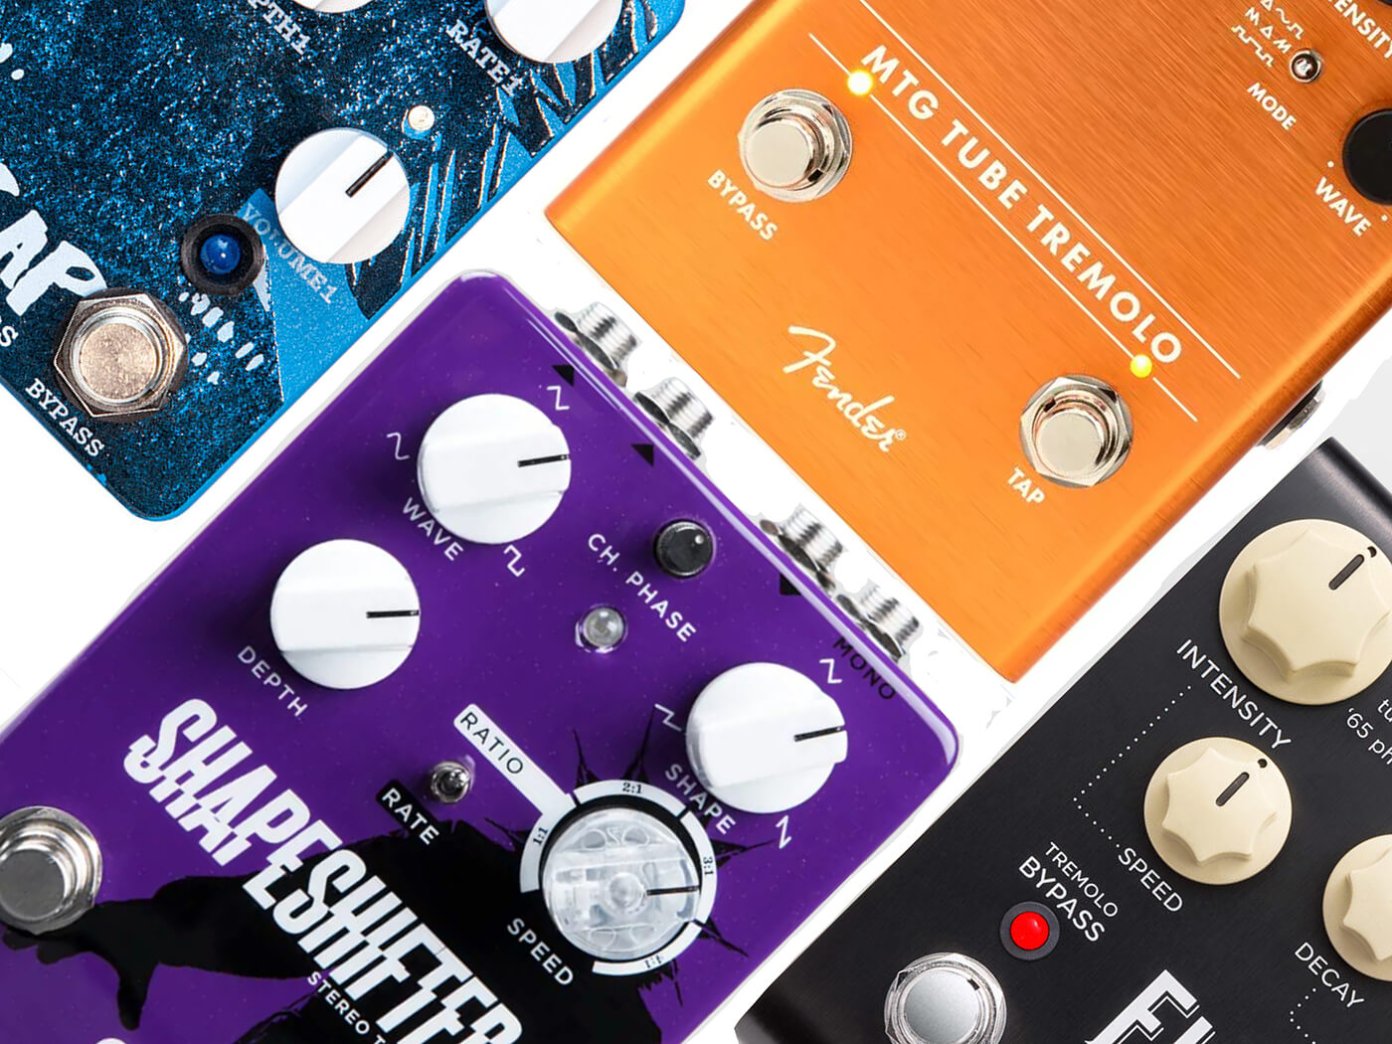 The best guitar pedals to buy in 2023 16 best tremolo pedals